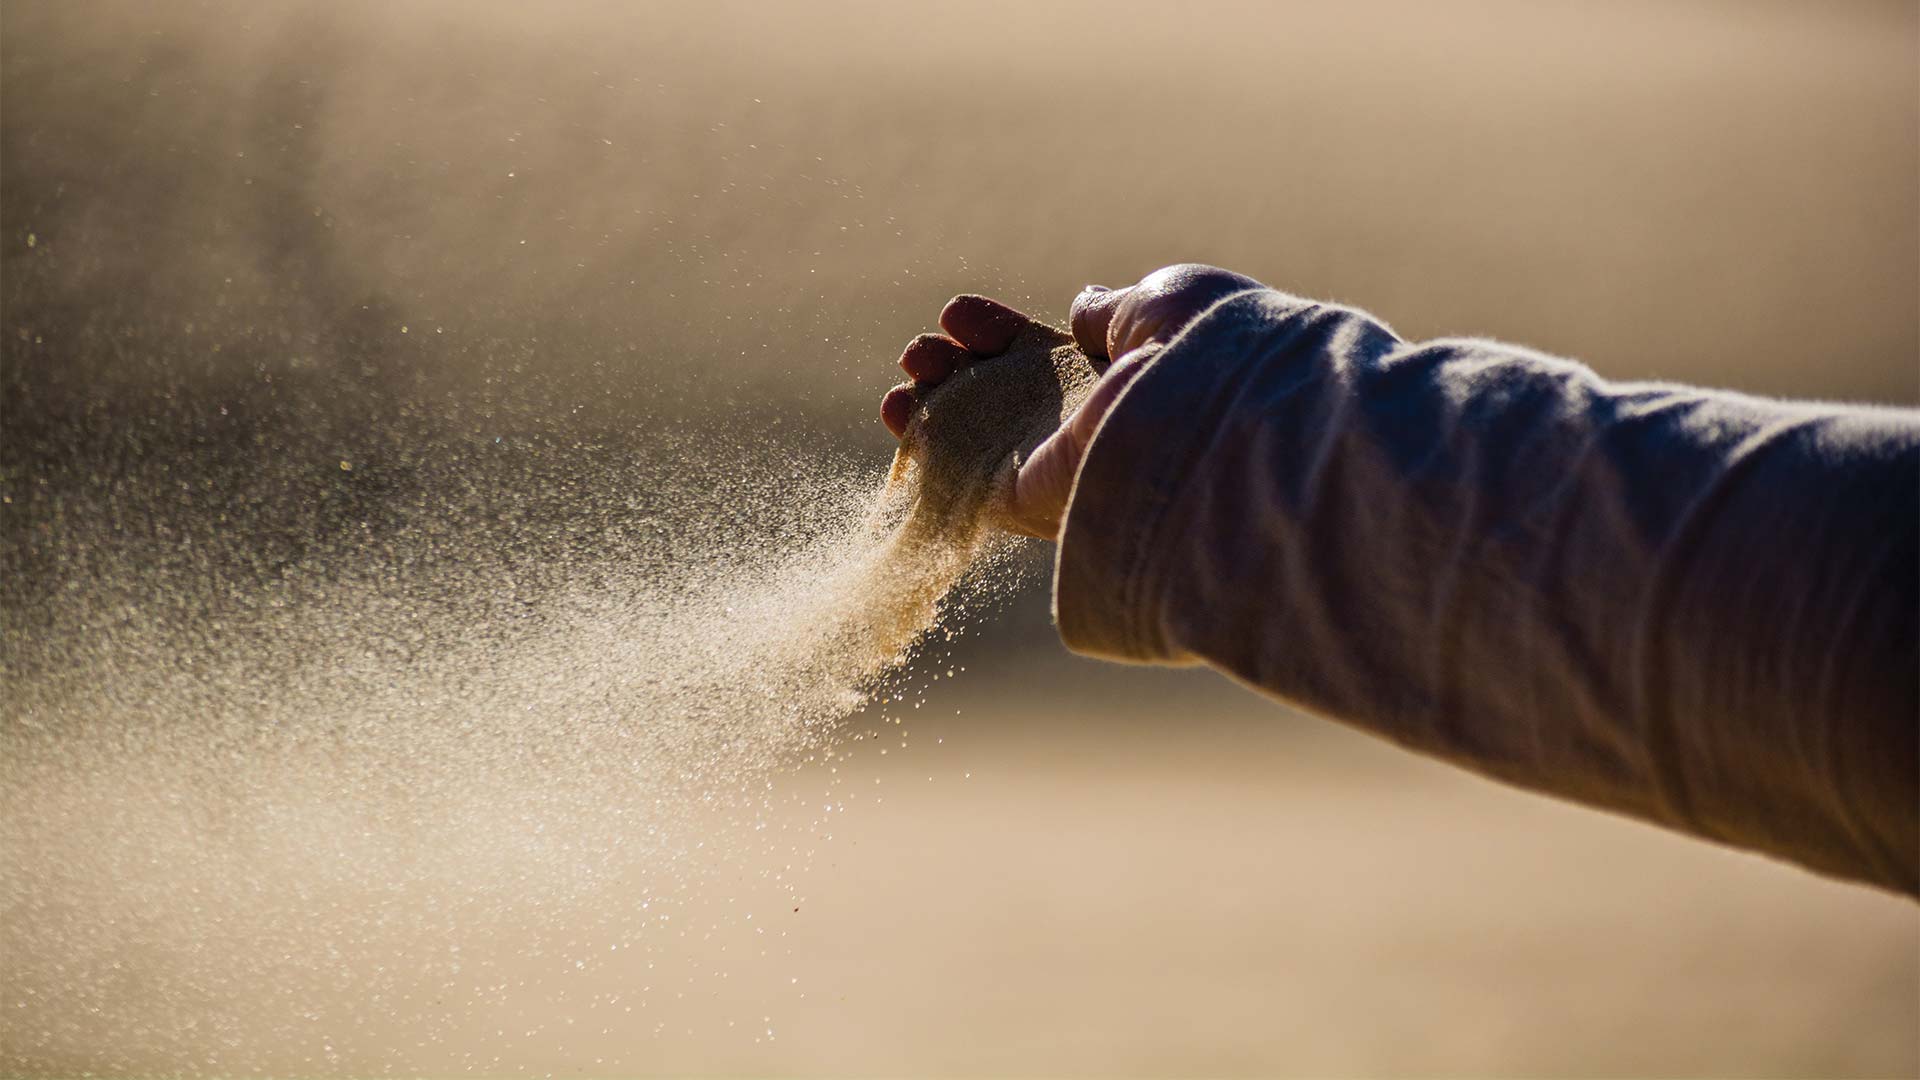 Sand pouring out of someones hand